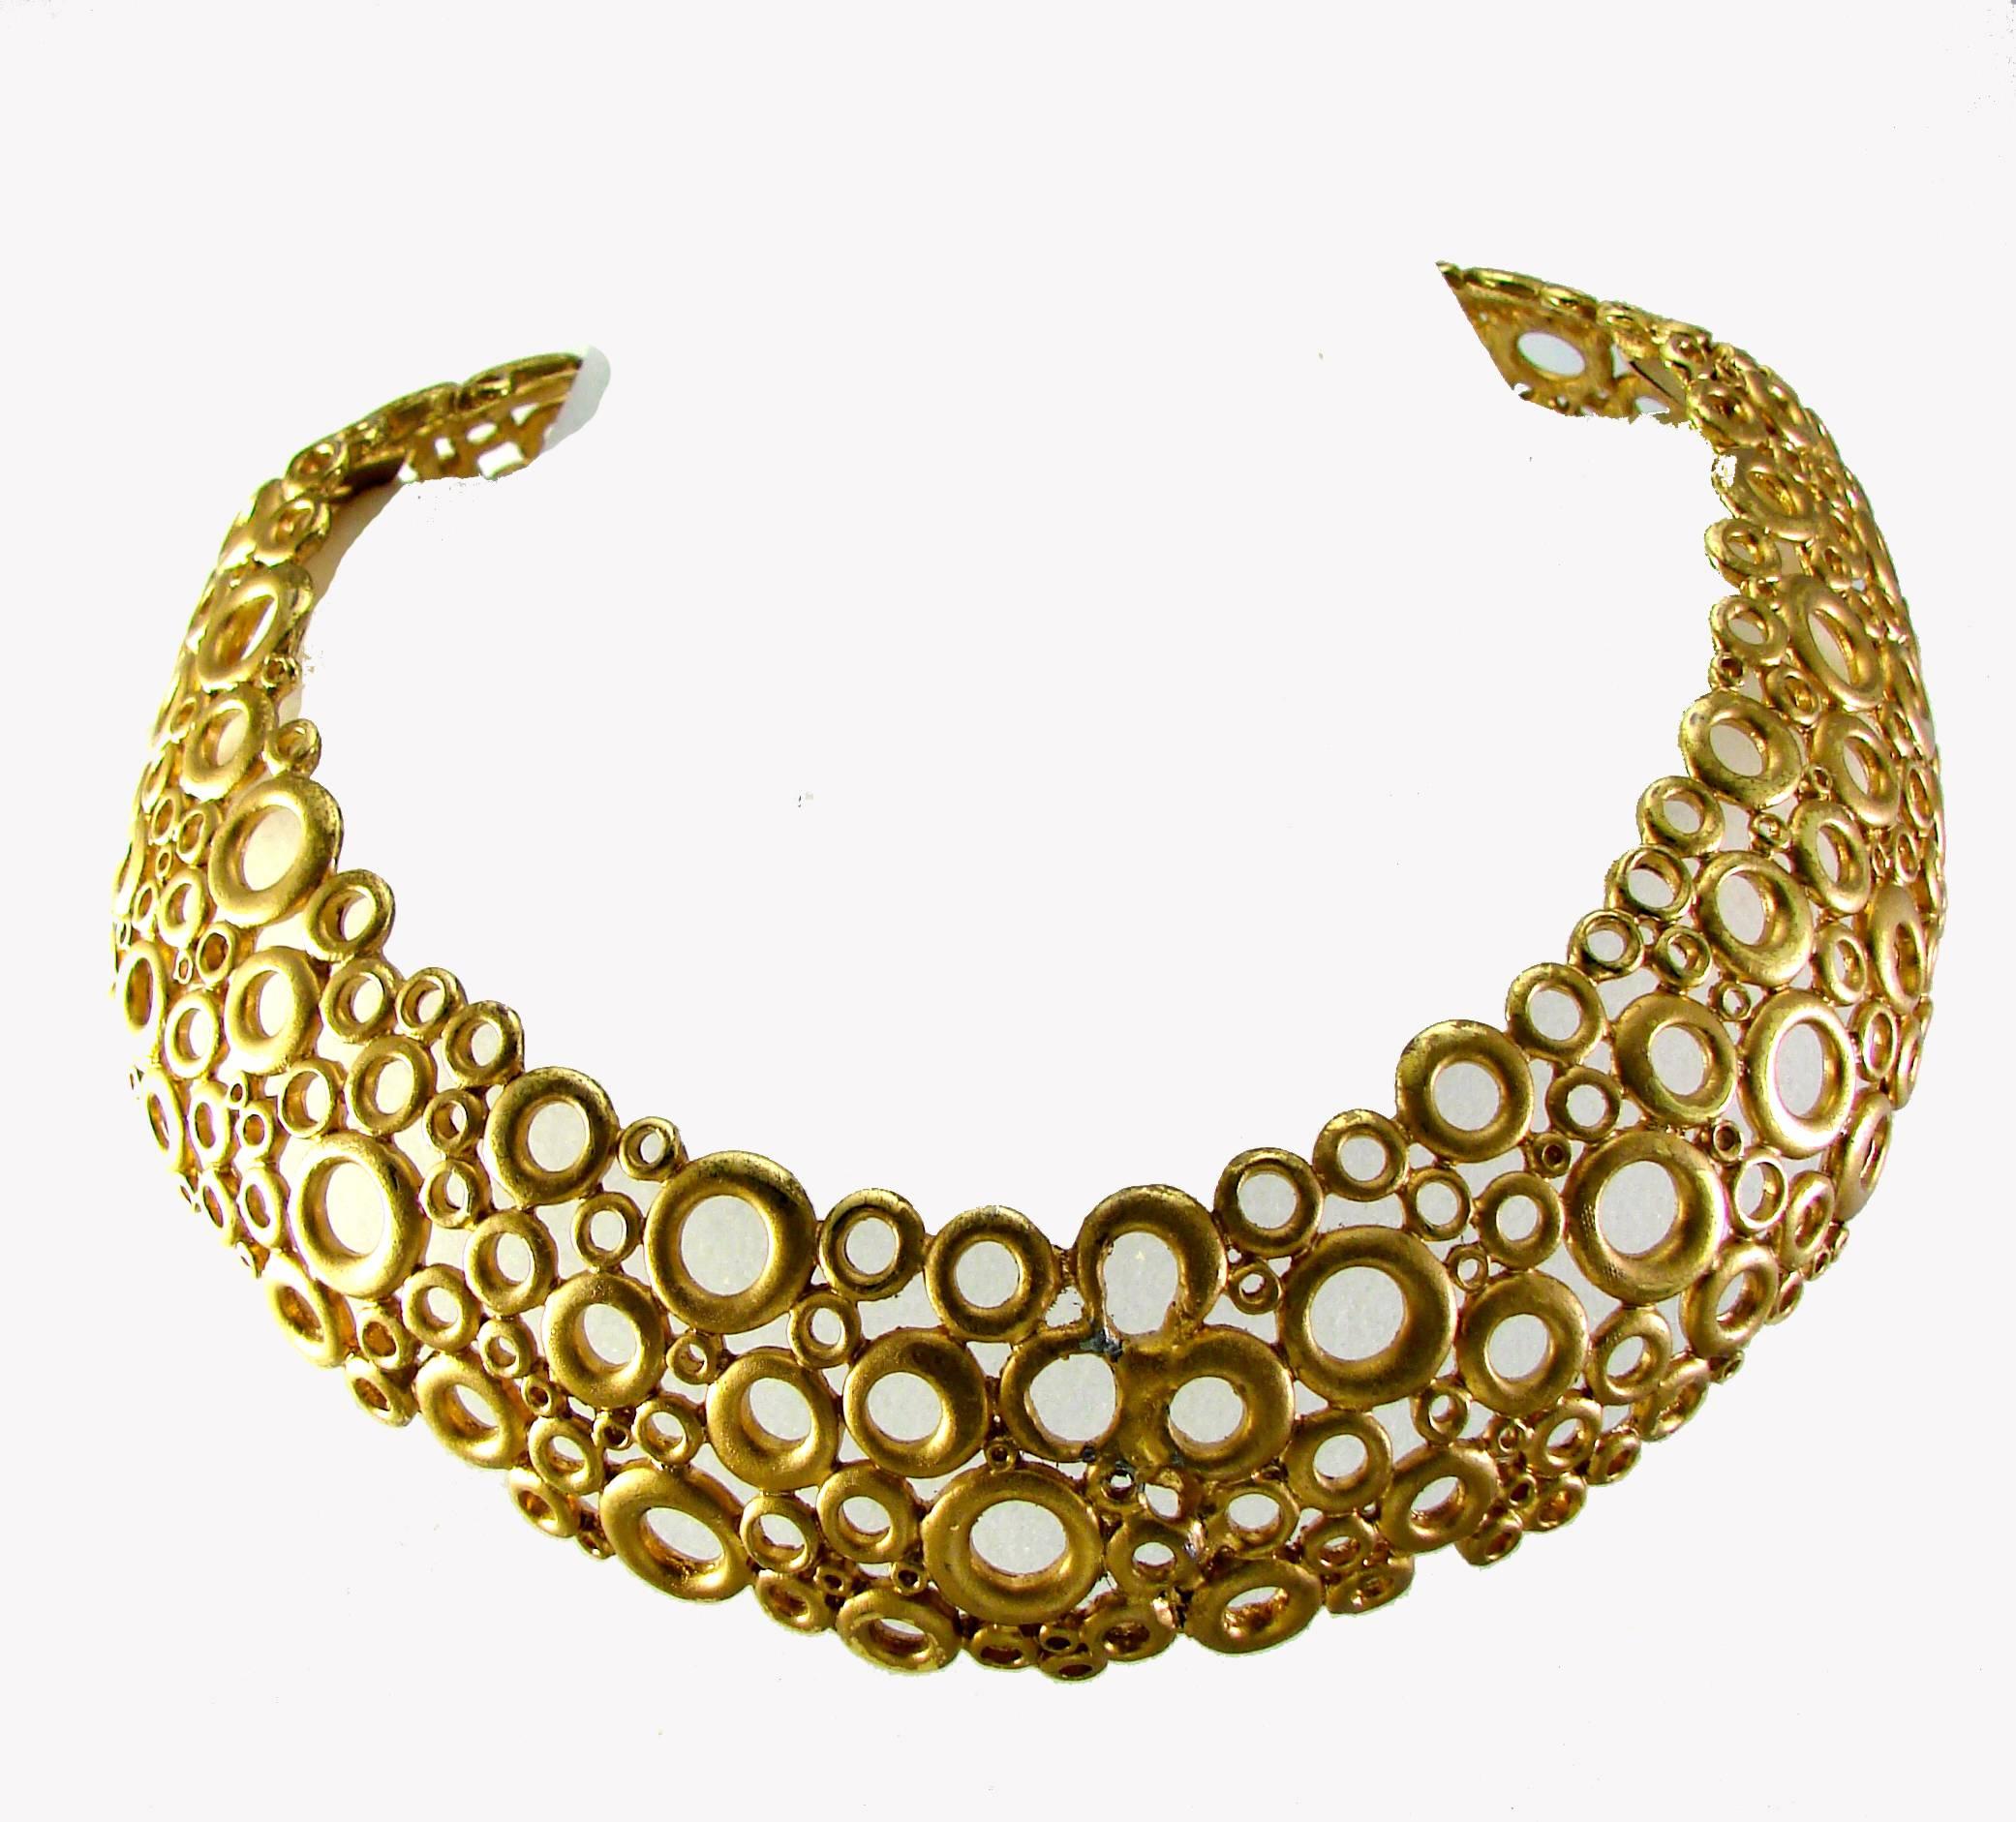 This collar necklace was made by GIVENCHY c1970s and is made
from gilt metal fashioned into a modernist batch of circles! Very cool piece! Features two hinges to set the piece around your neck. In very good condition for its age, upon close